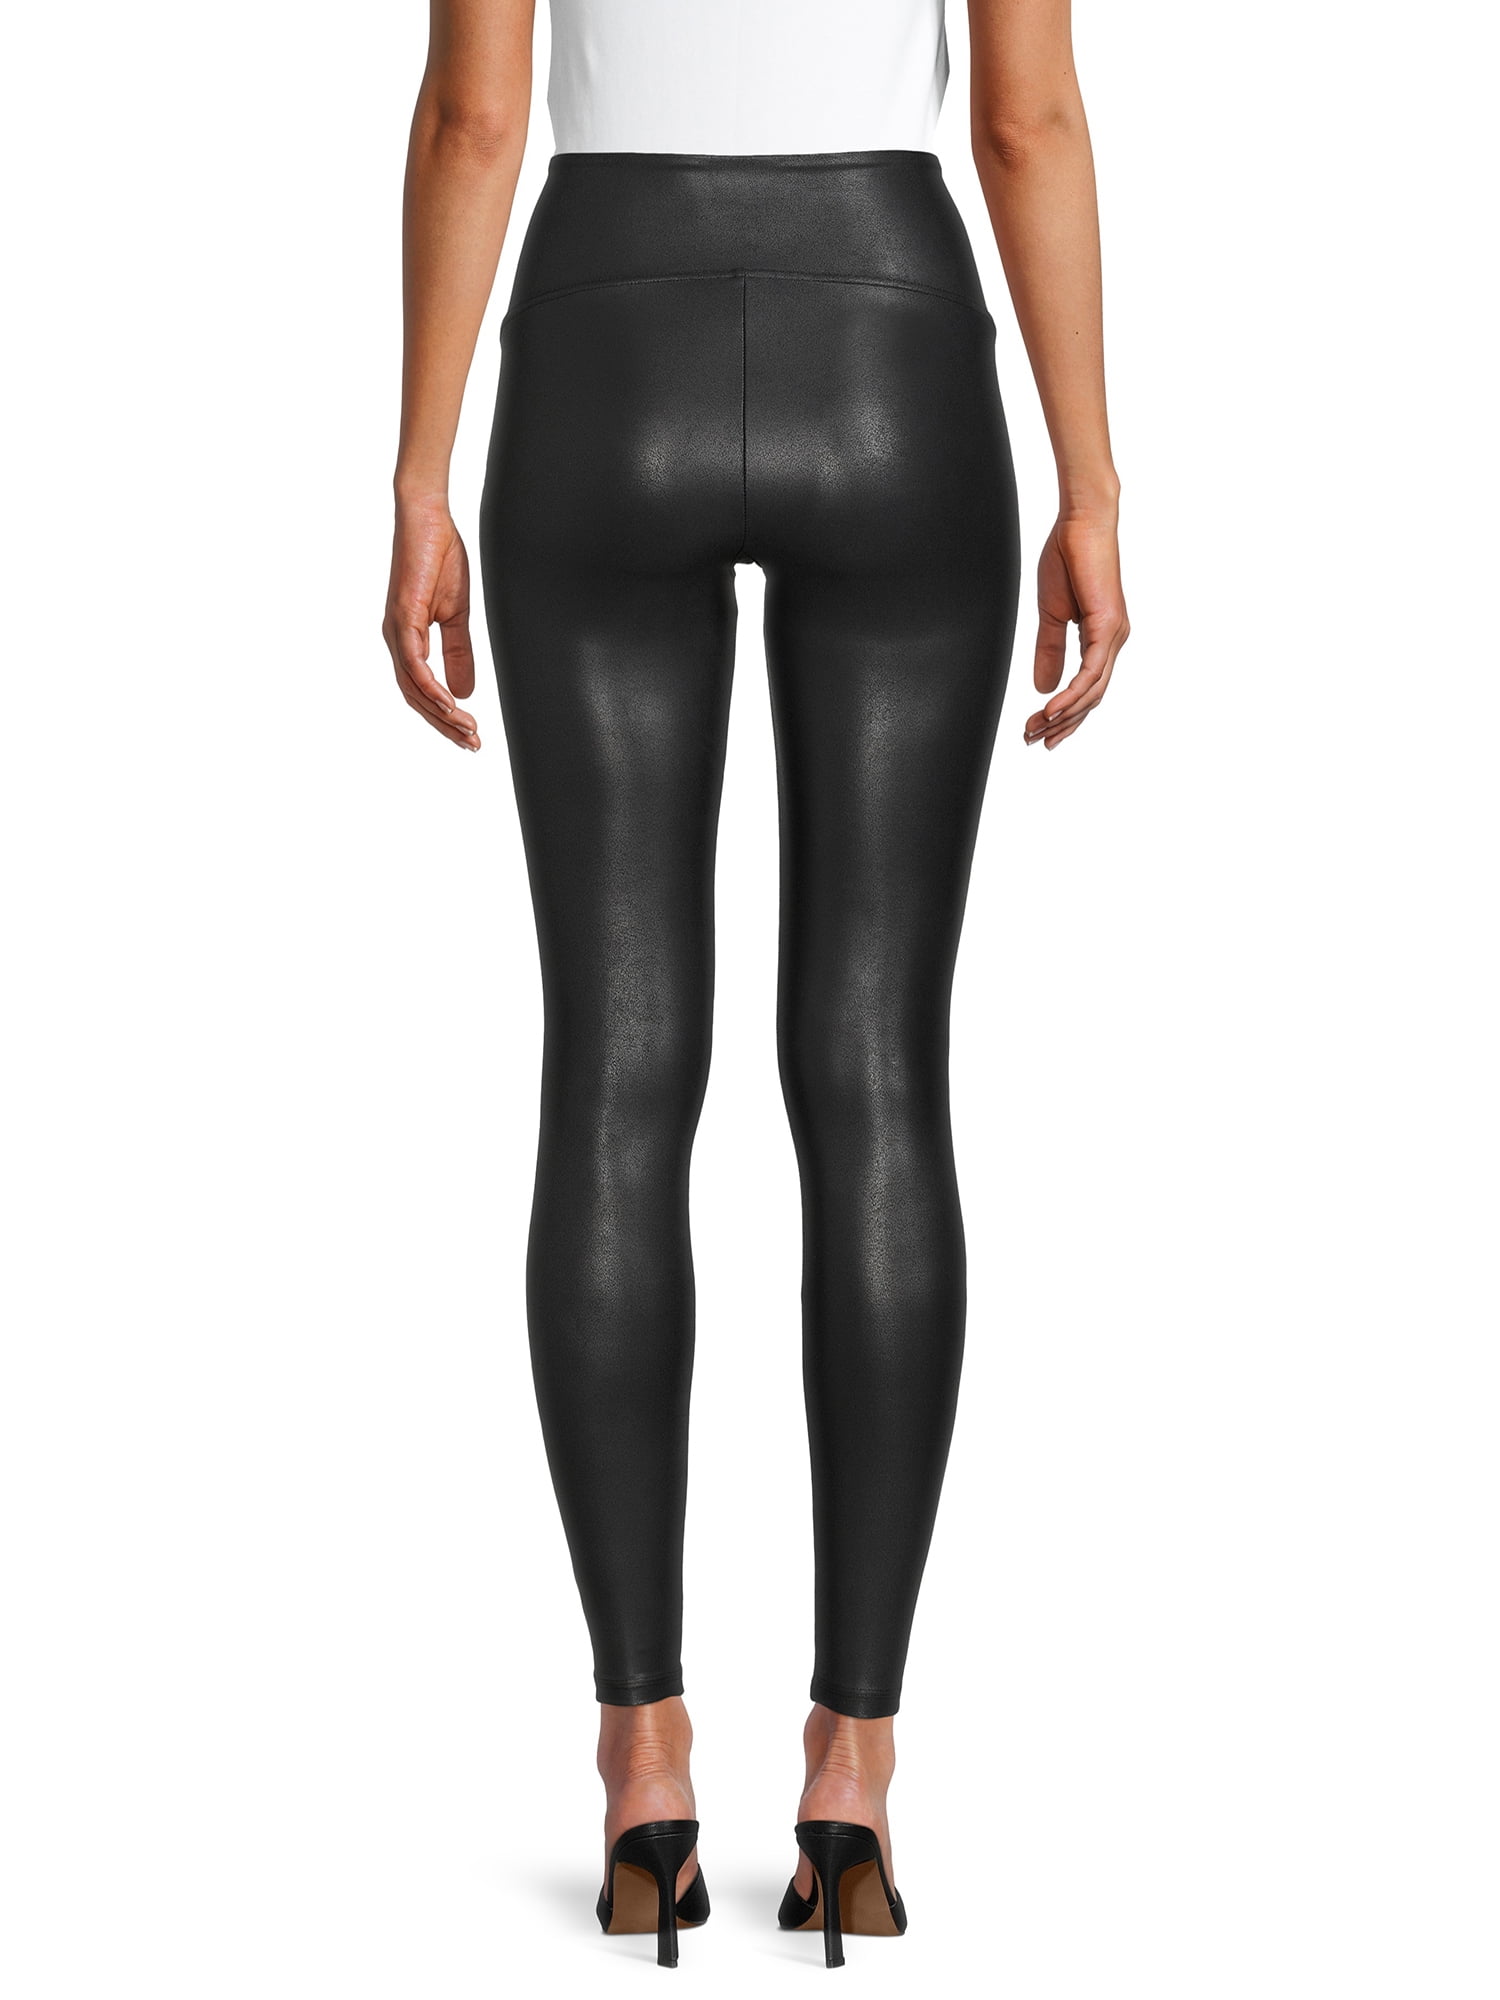 Julia Women's Faux Leather Leggings Size L/XL – Recycled Rock and Roll